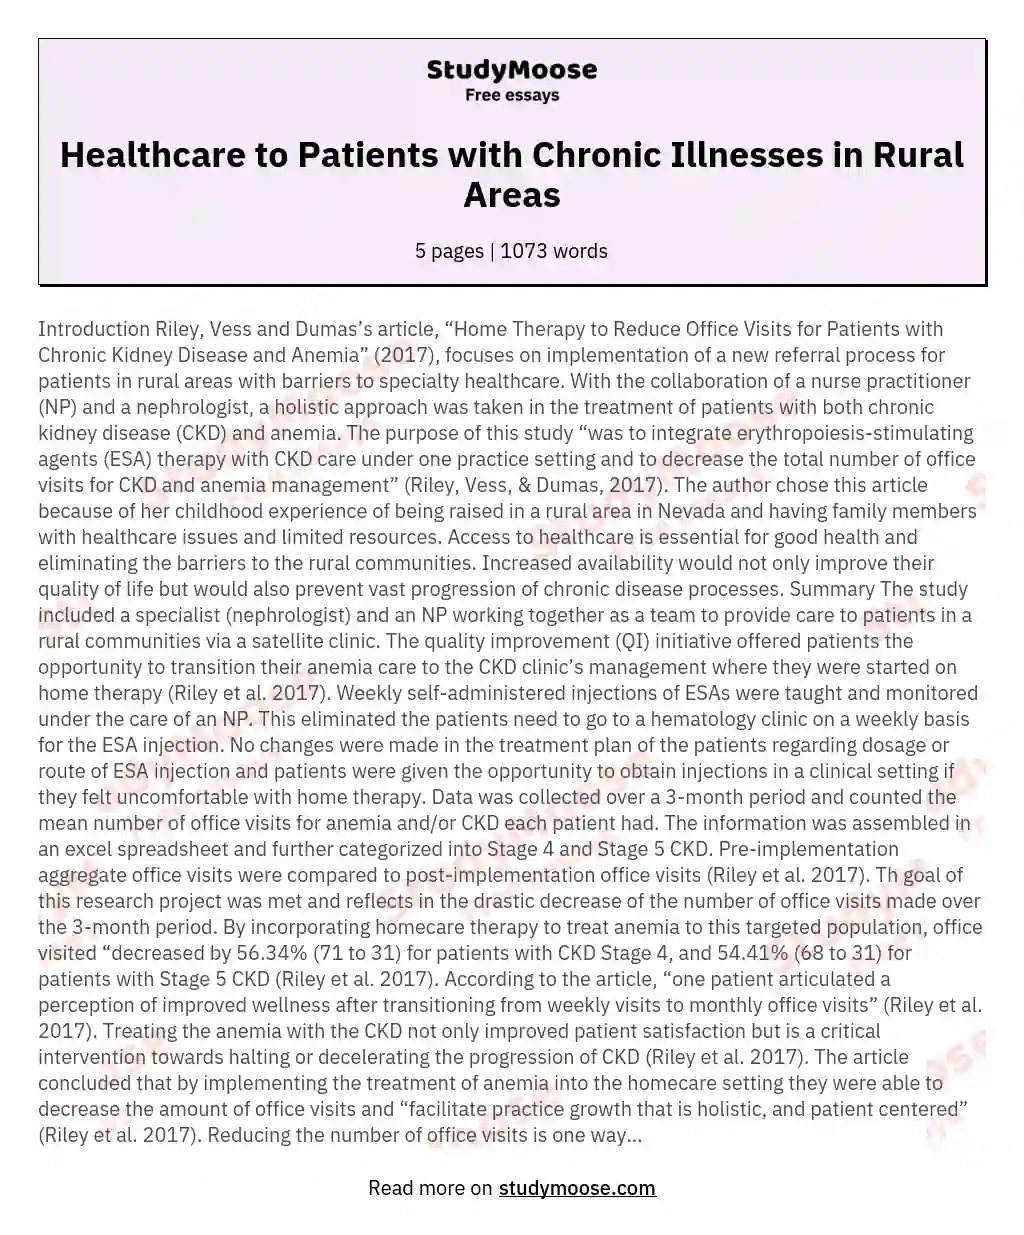 Healthcare to Patients with Chronic Illnesses in Rural Areas essay